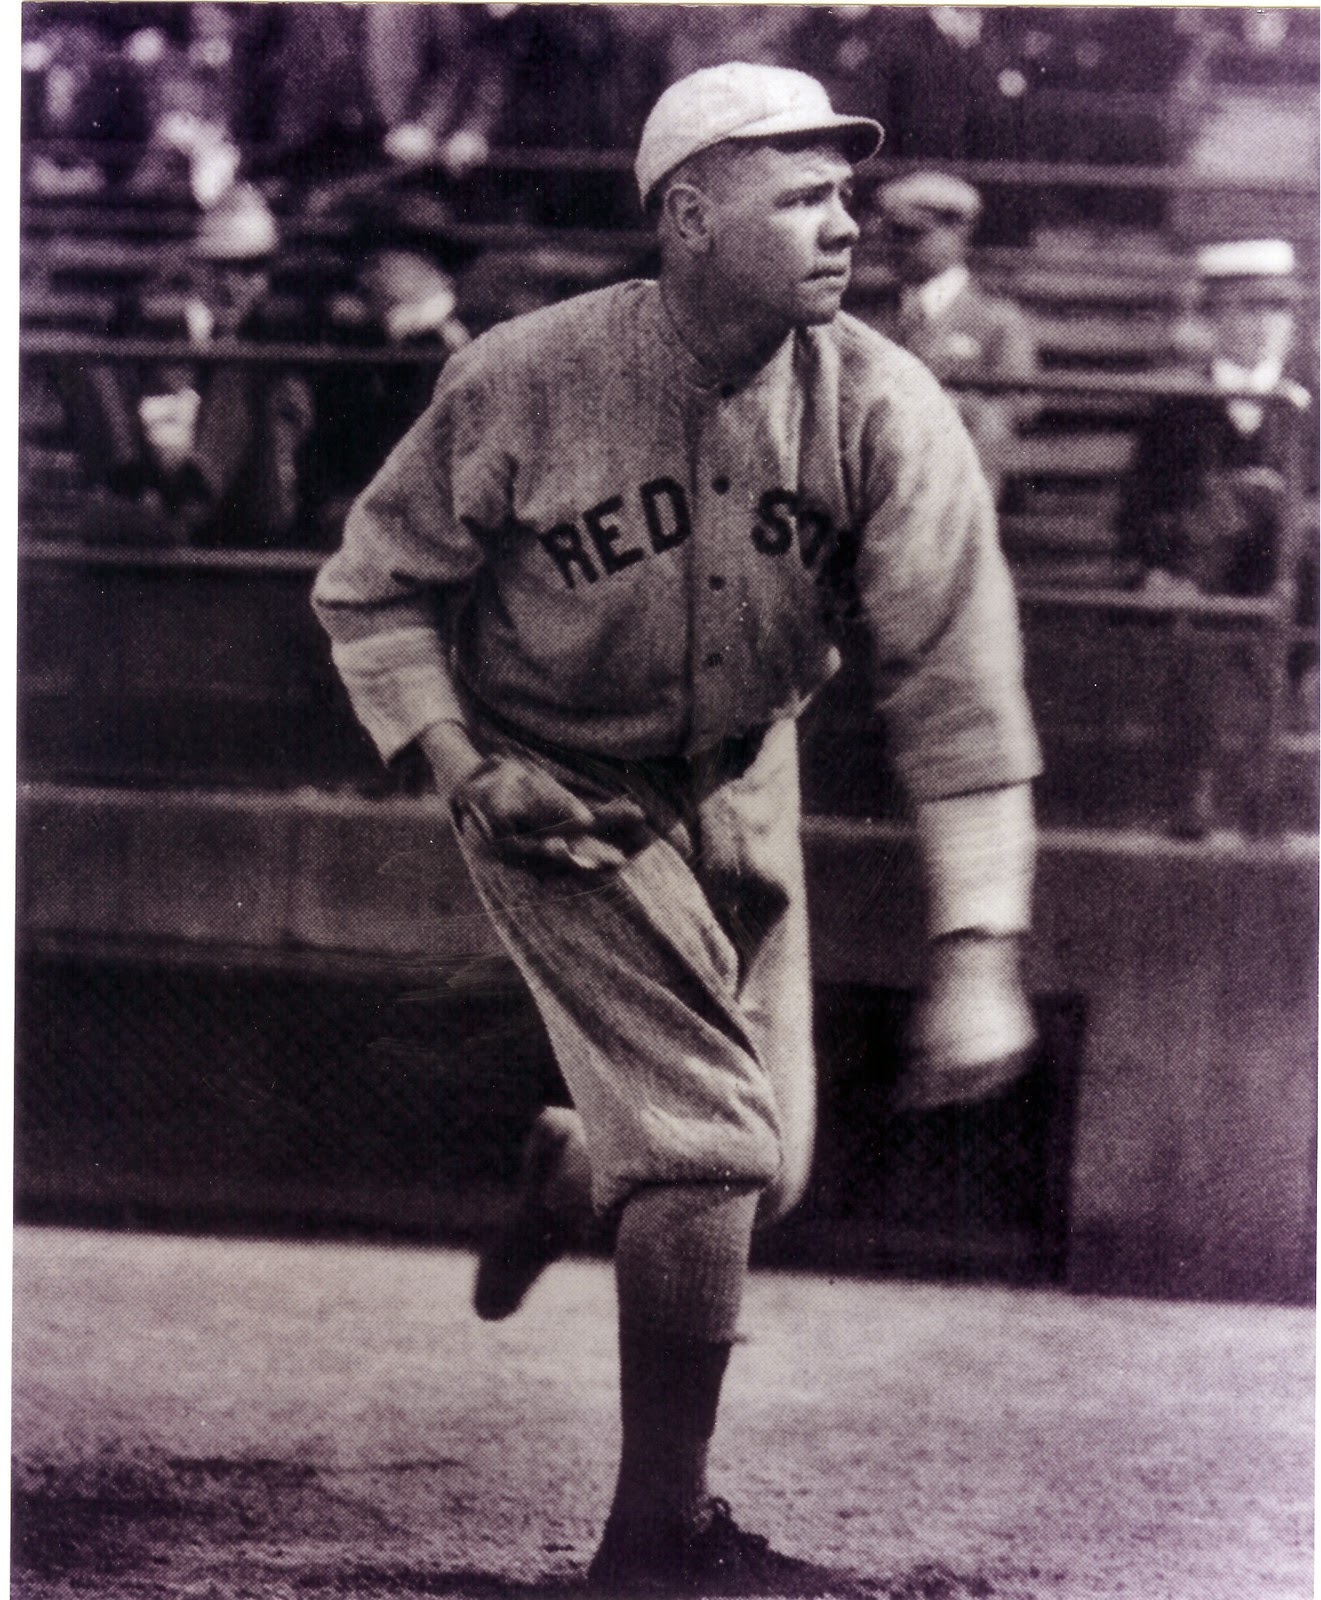 July 11, 1914: Babe Ruth makes his major-league debut with Red Sox